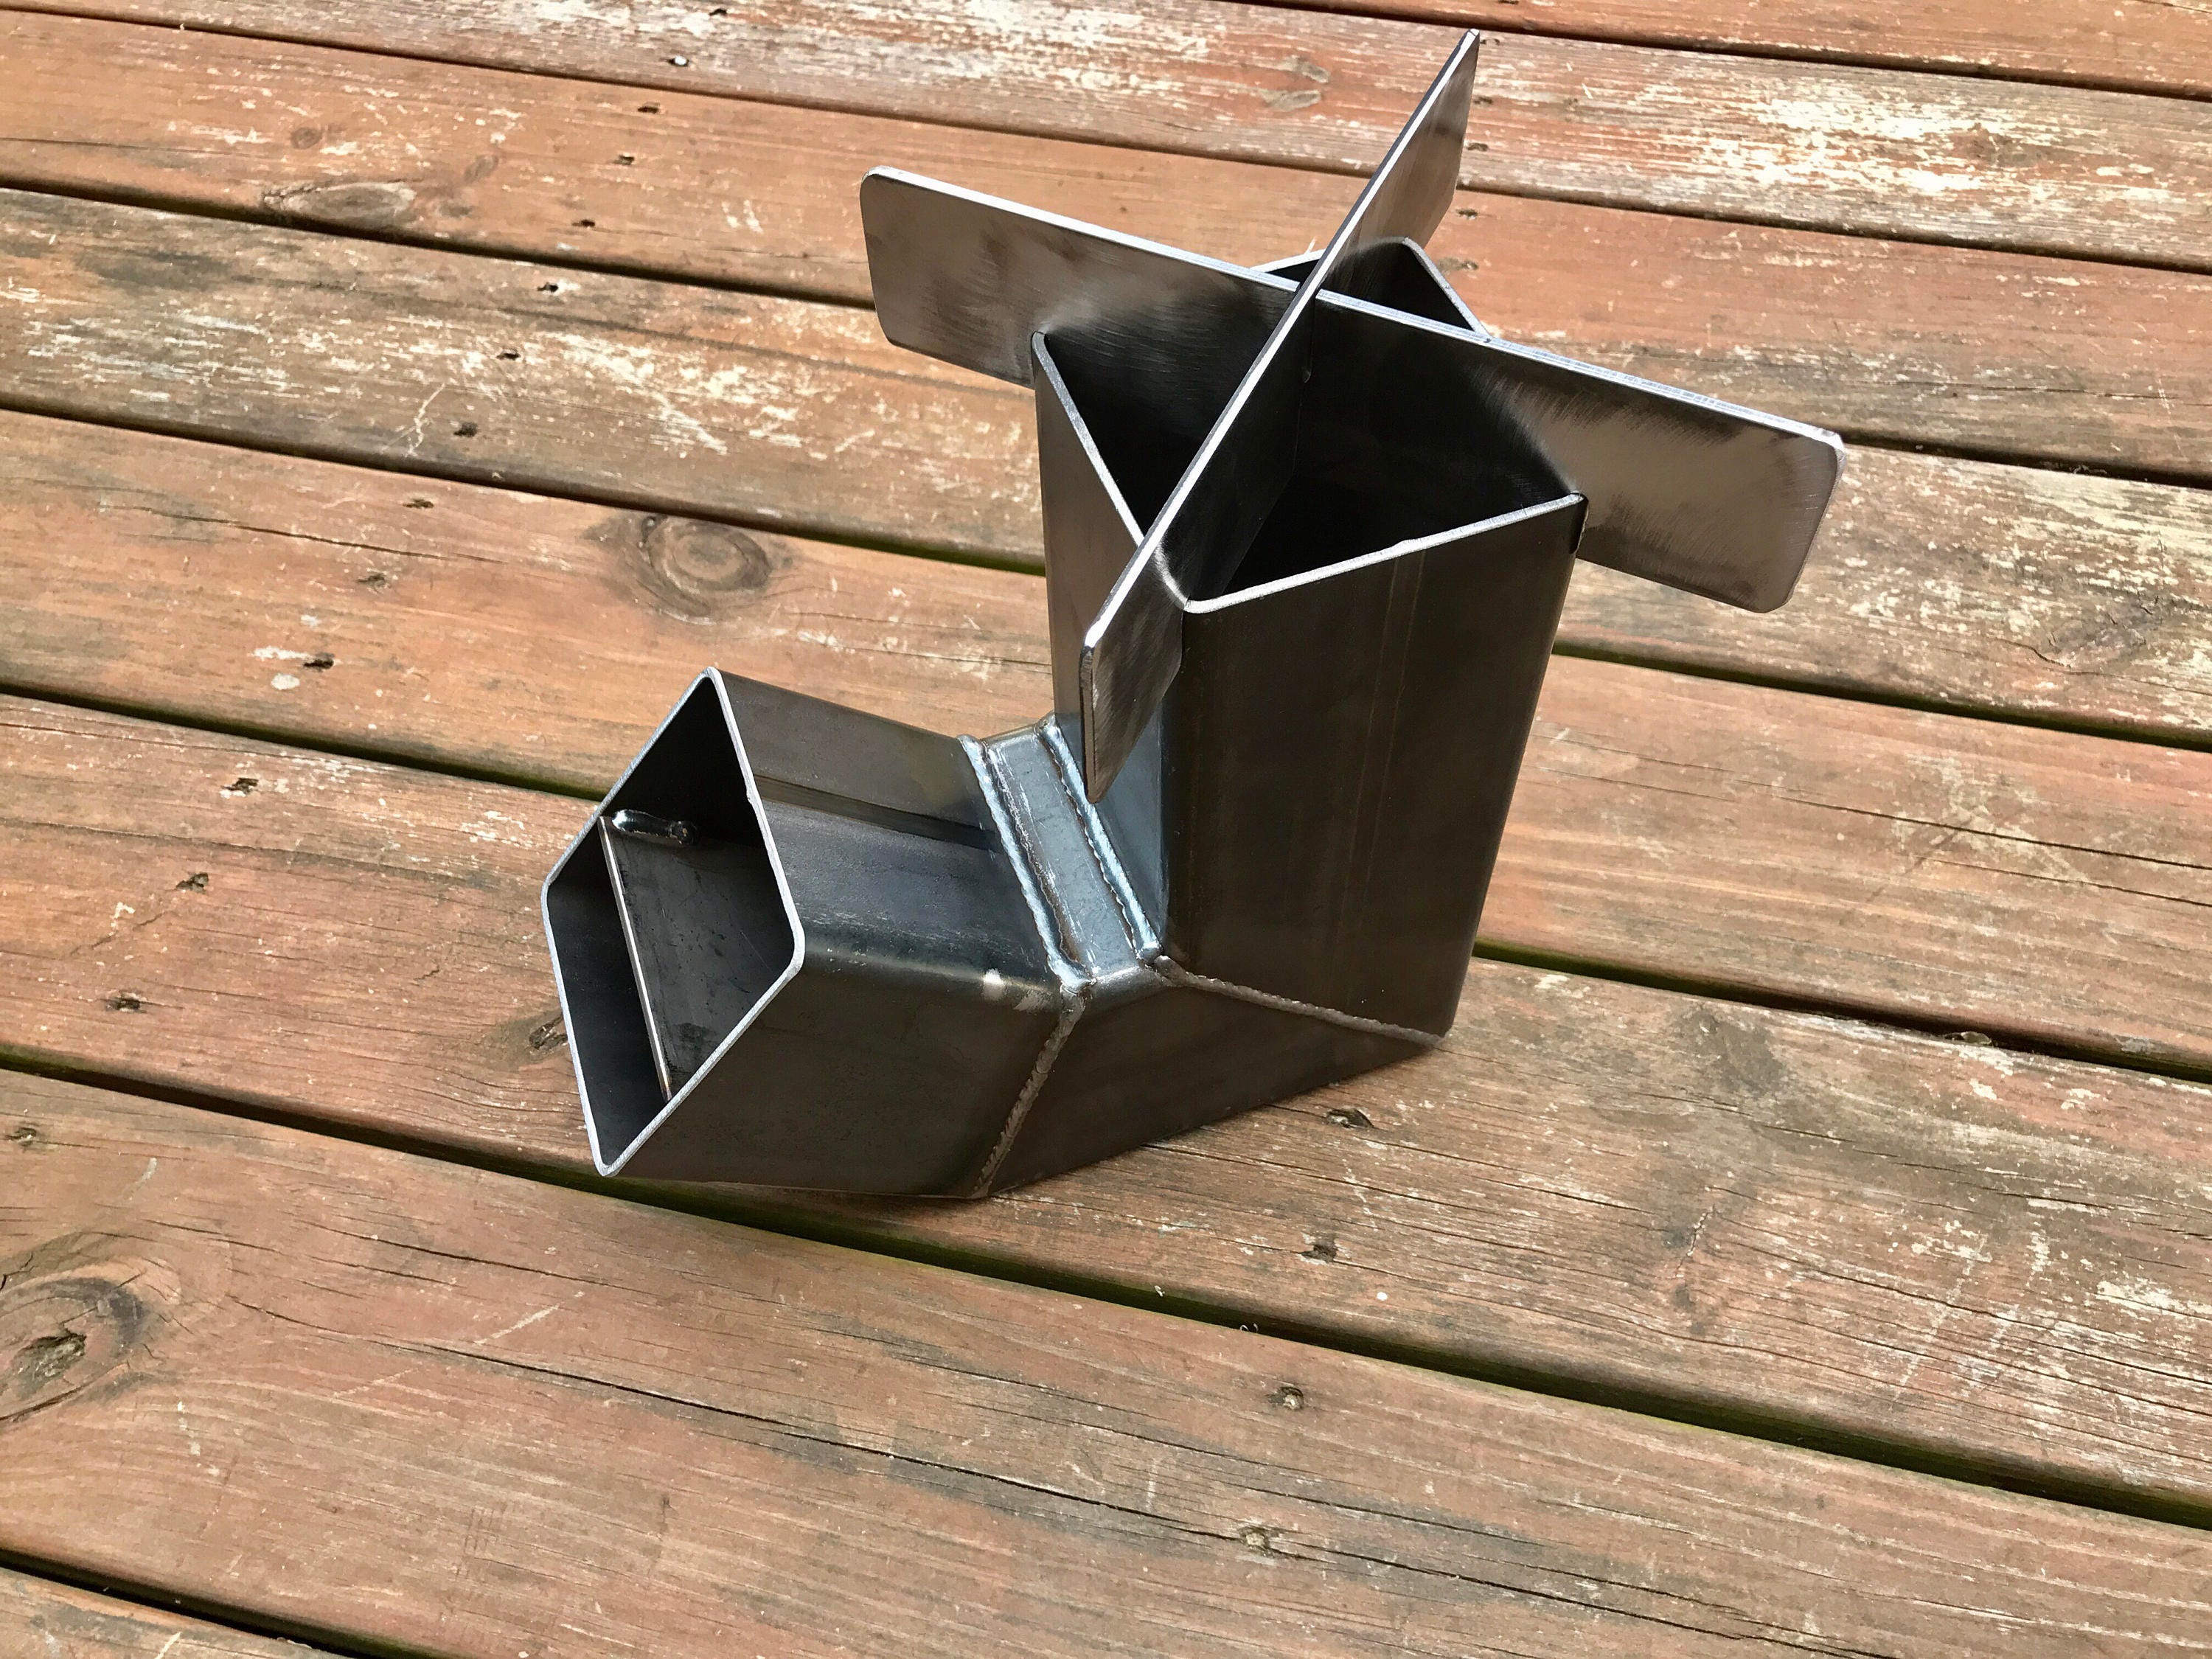 Self Feeding Rocket Stove With Removable Top / Camping Stove